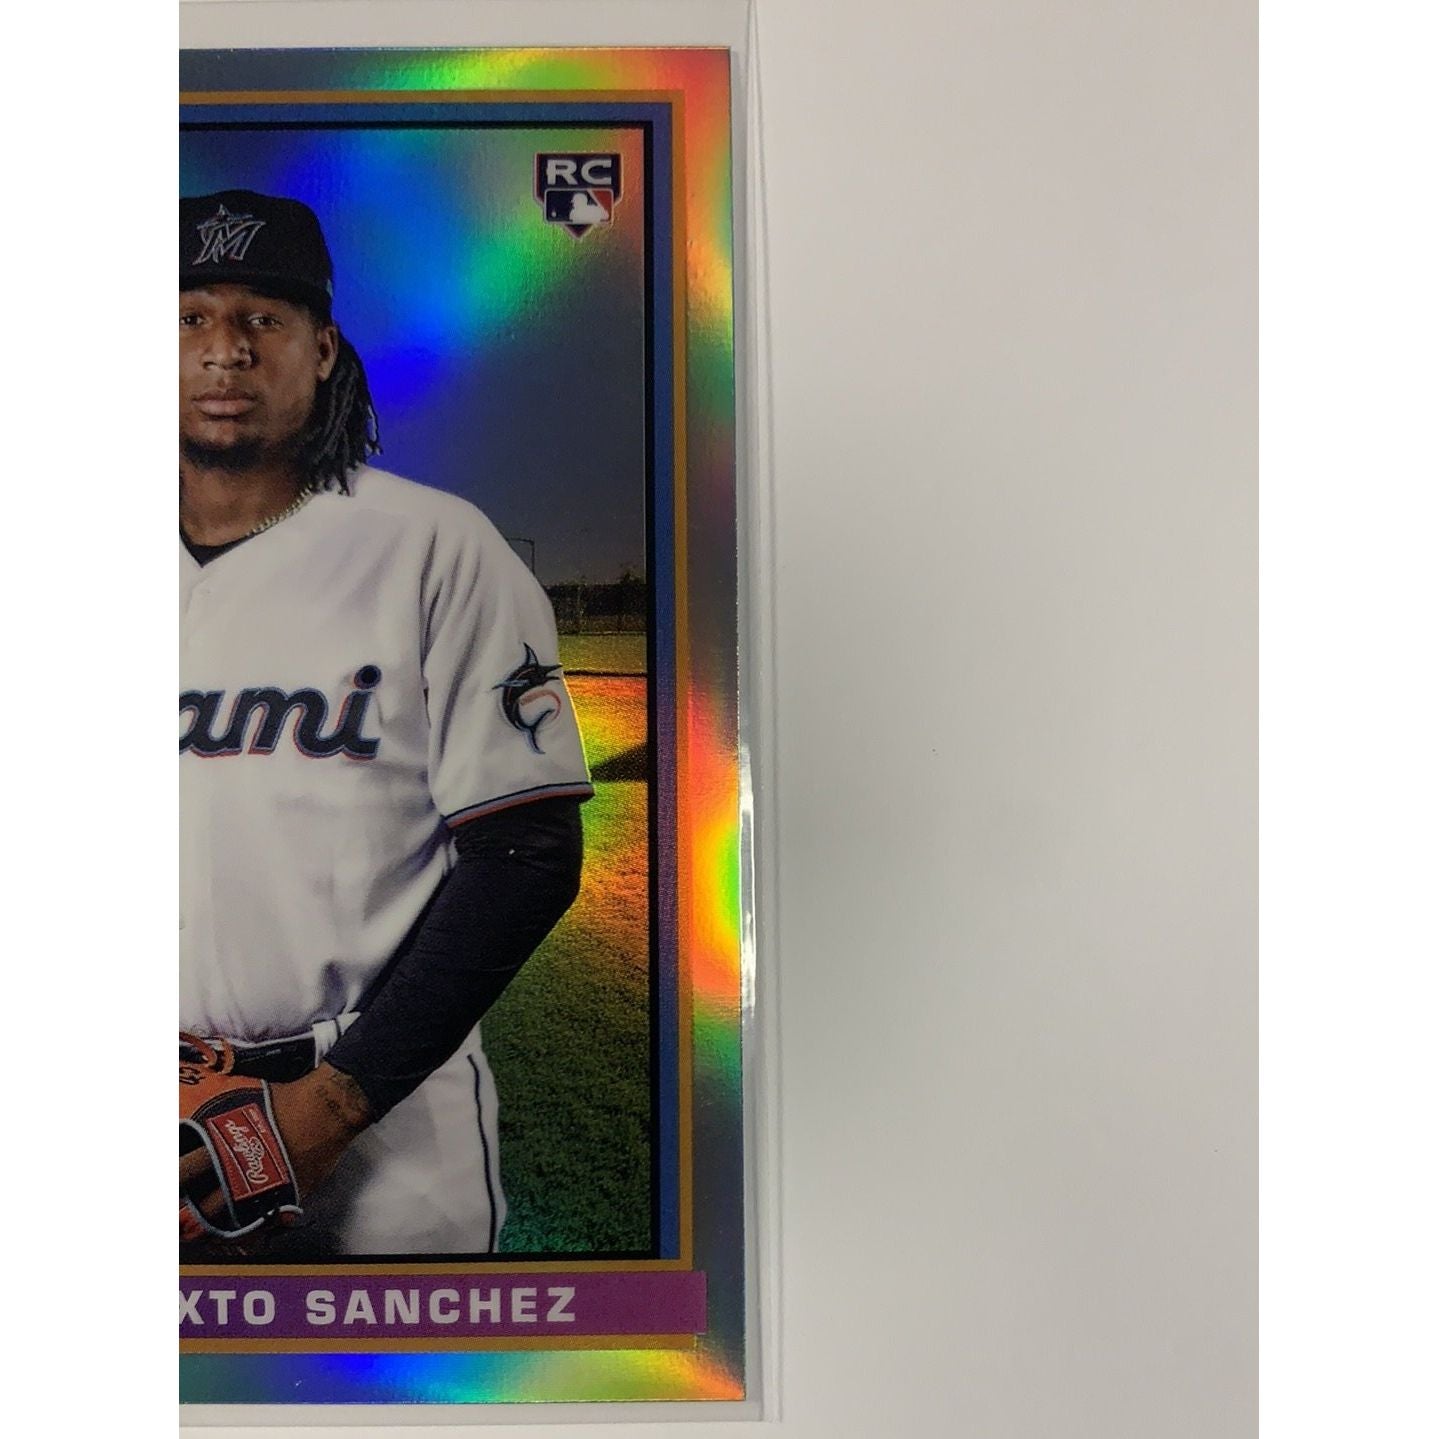  2021 Bowman Chrome Sixto Sánchez 91’ RC Refractor  Local Legends Cards & Collectibles